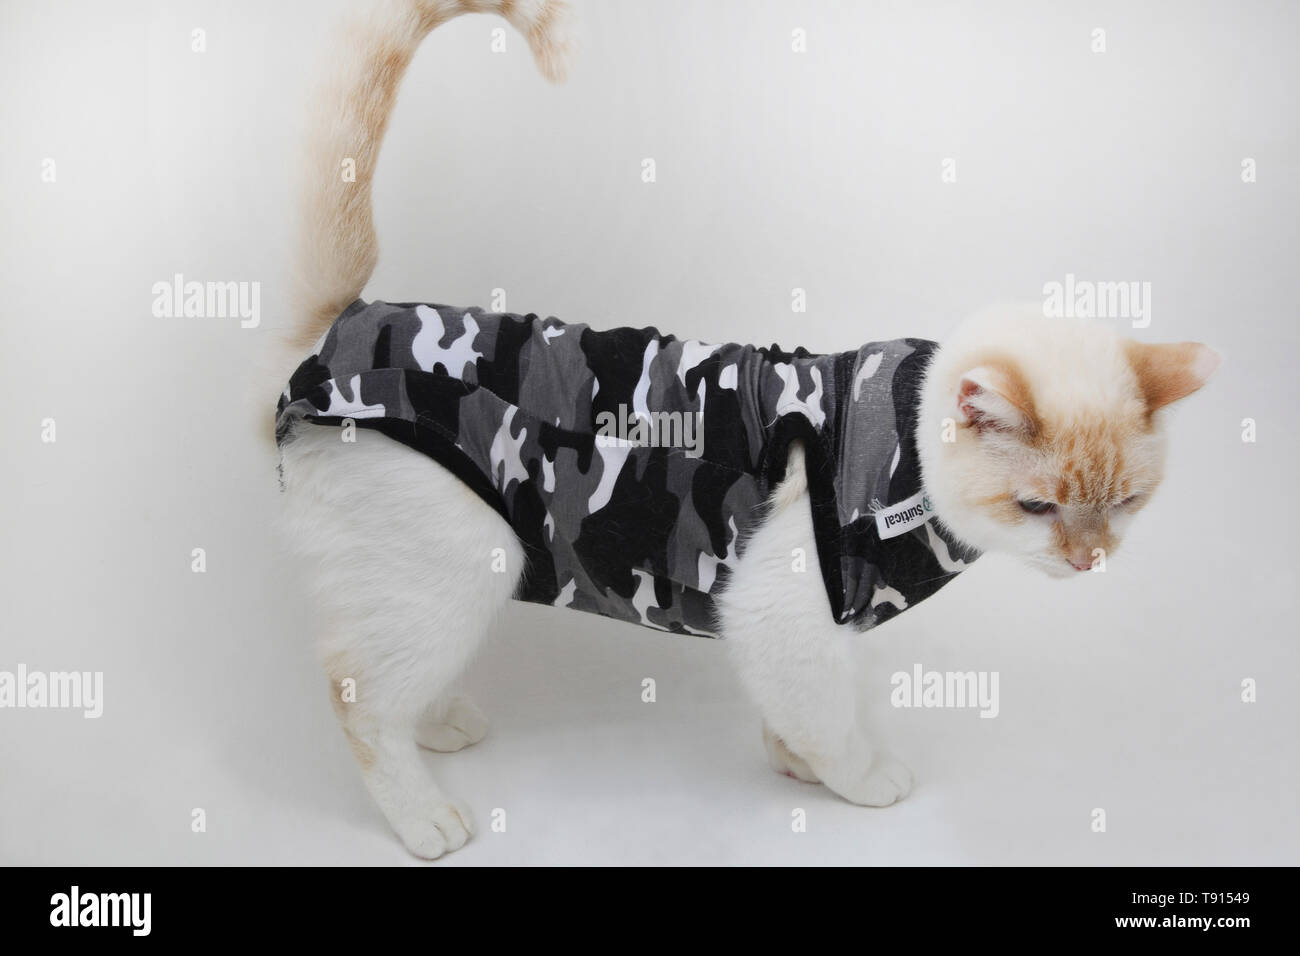 SUITICAL Recovery Suit for Cats, Tiger Print 